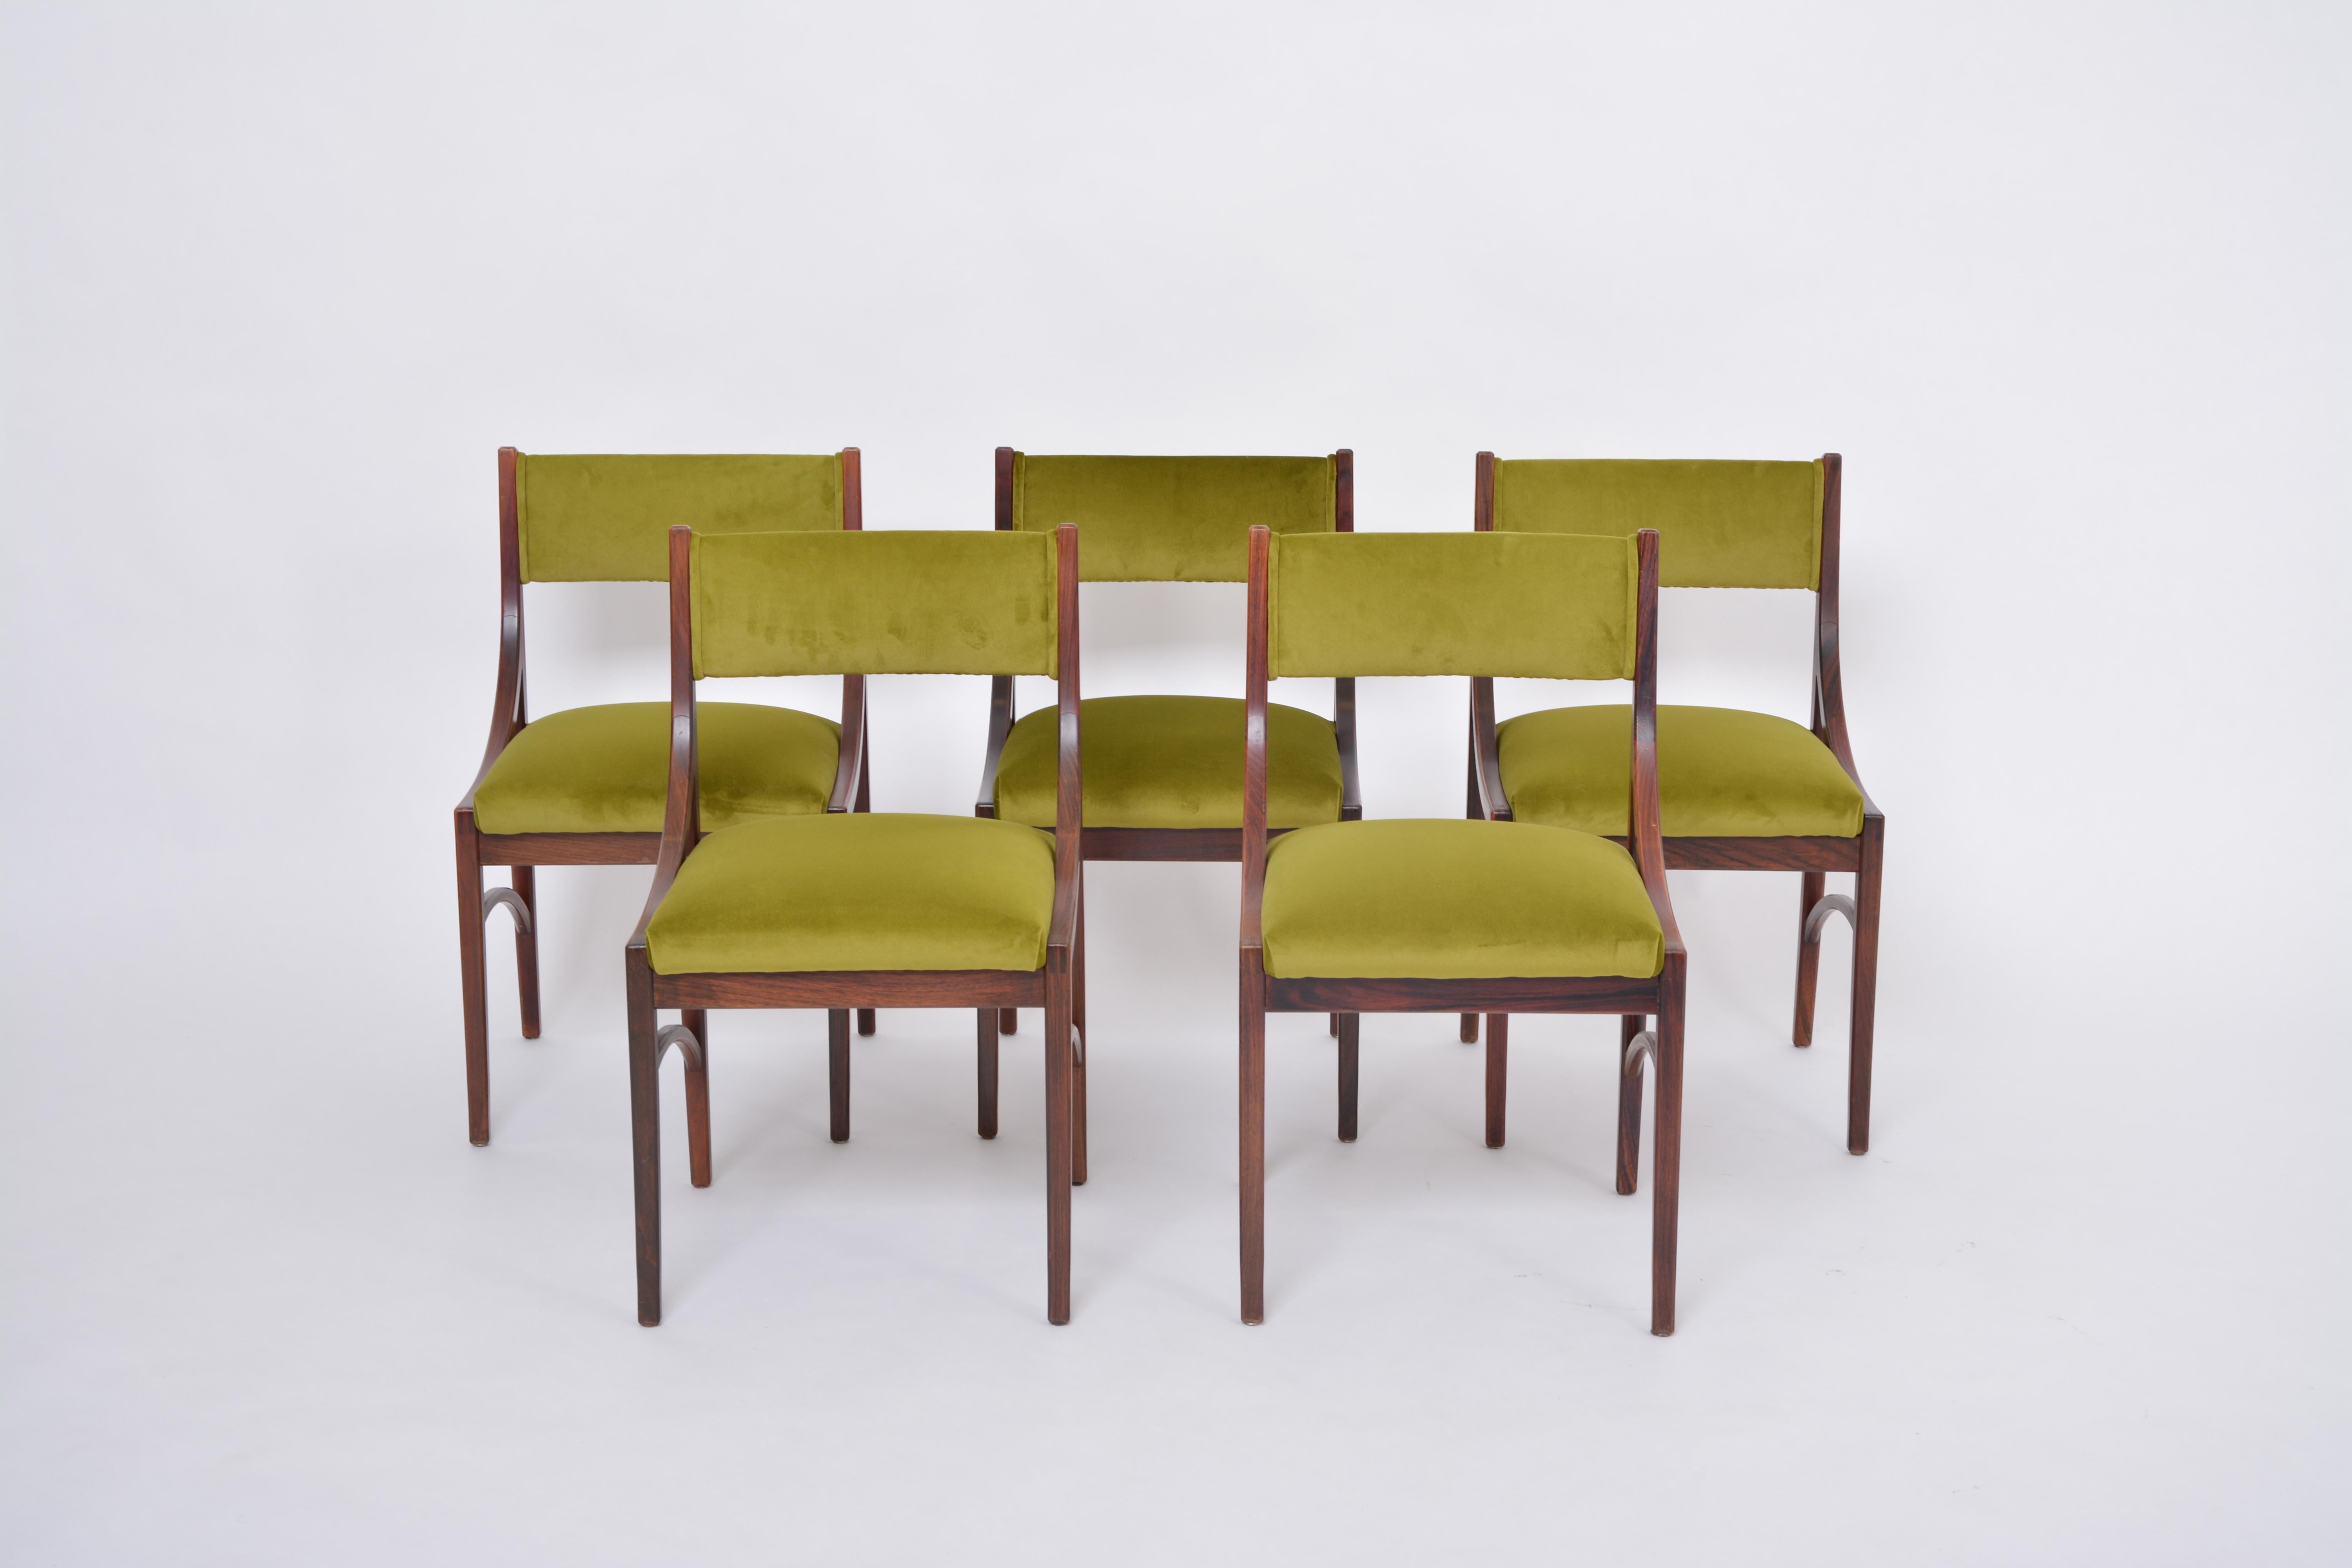 Set of five Mid-Century Modern Green reupholstered Dining Chairs by Ico Parisi 
Ico Parisi designed the model 110 chair in 1960. The chairs offered here are a version with padded backrest of this model. The chairs were produced by Italian company